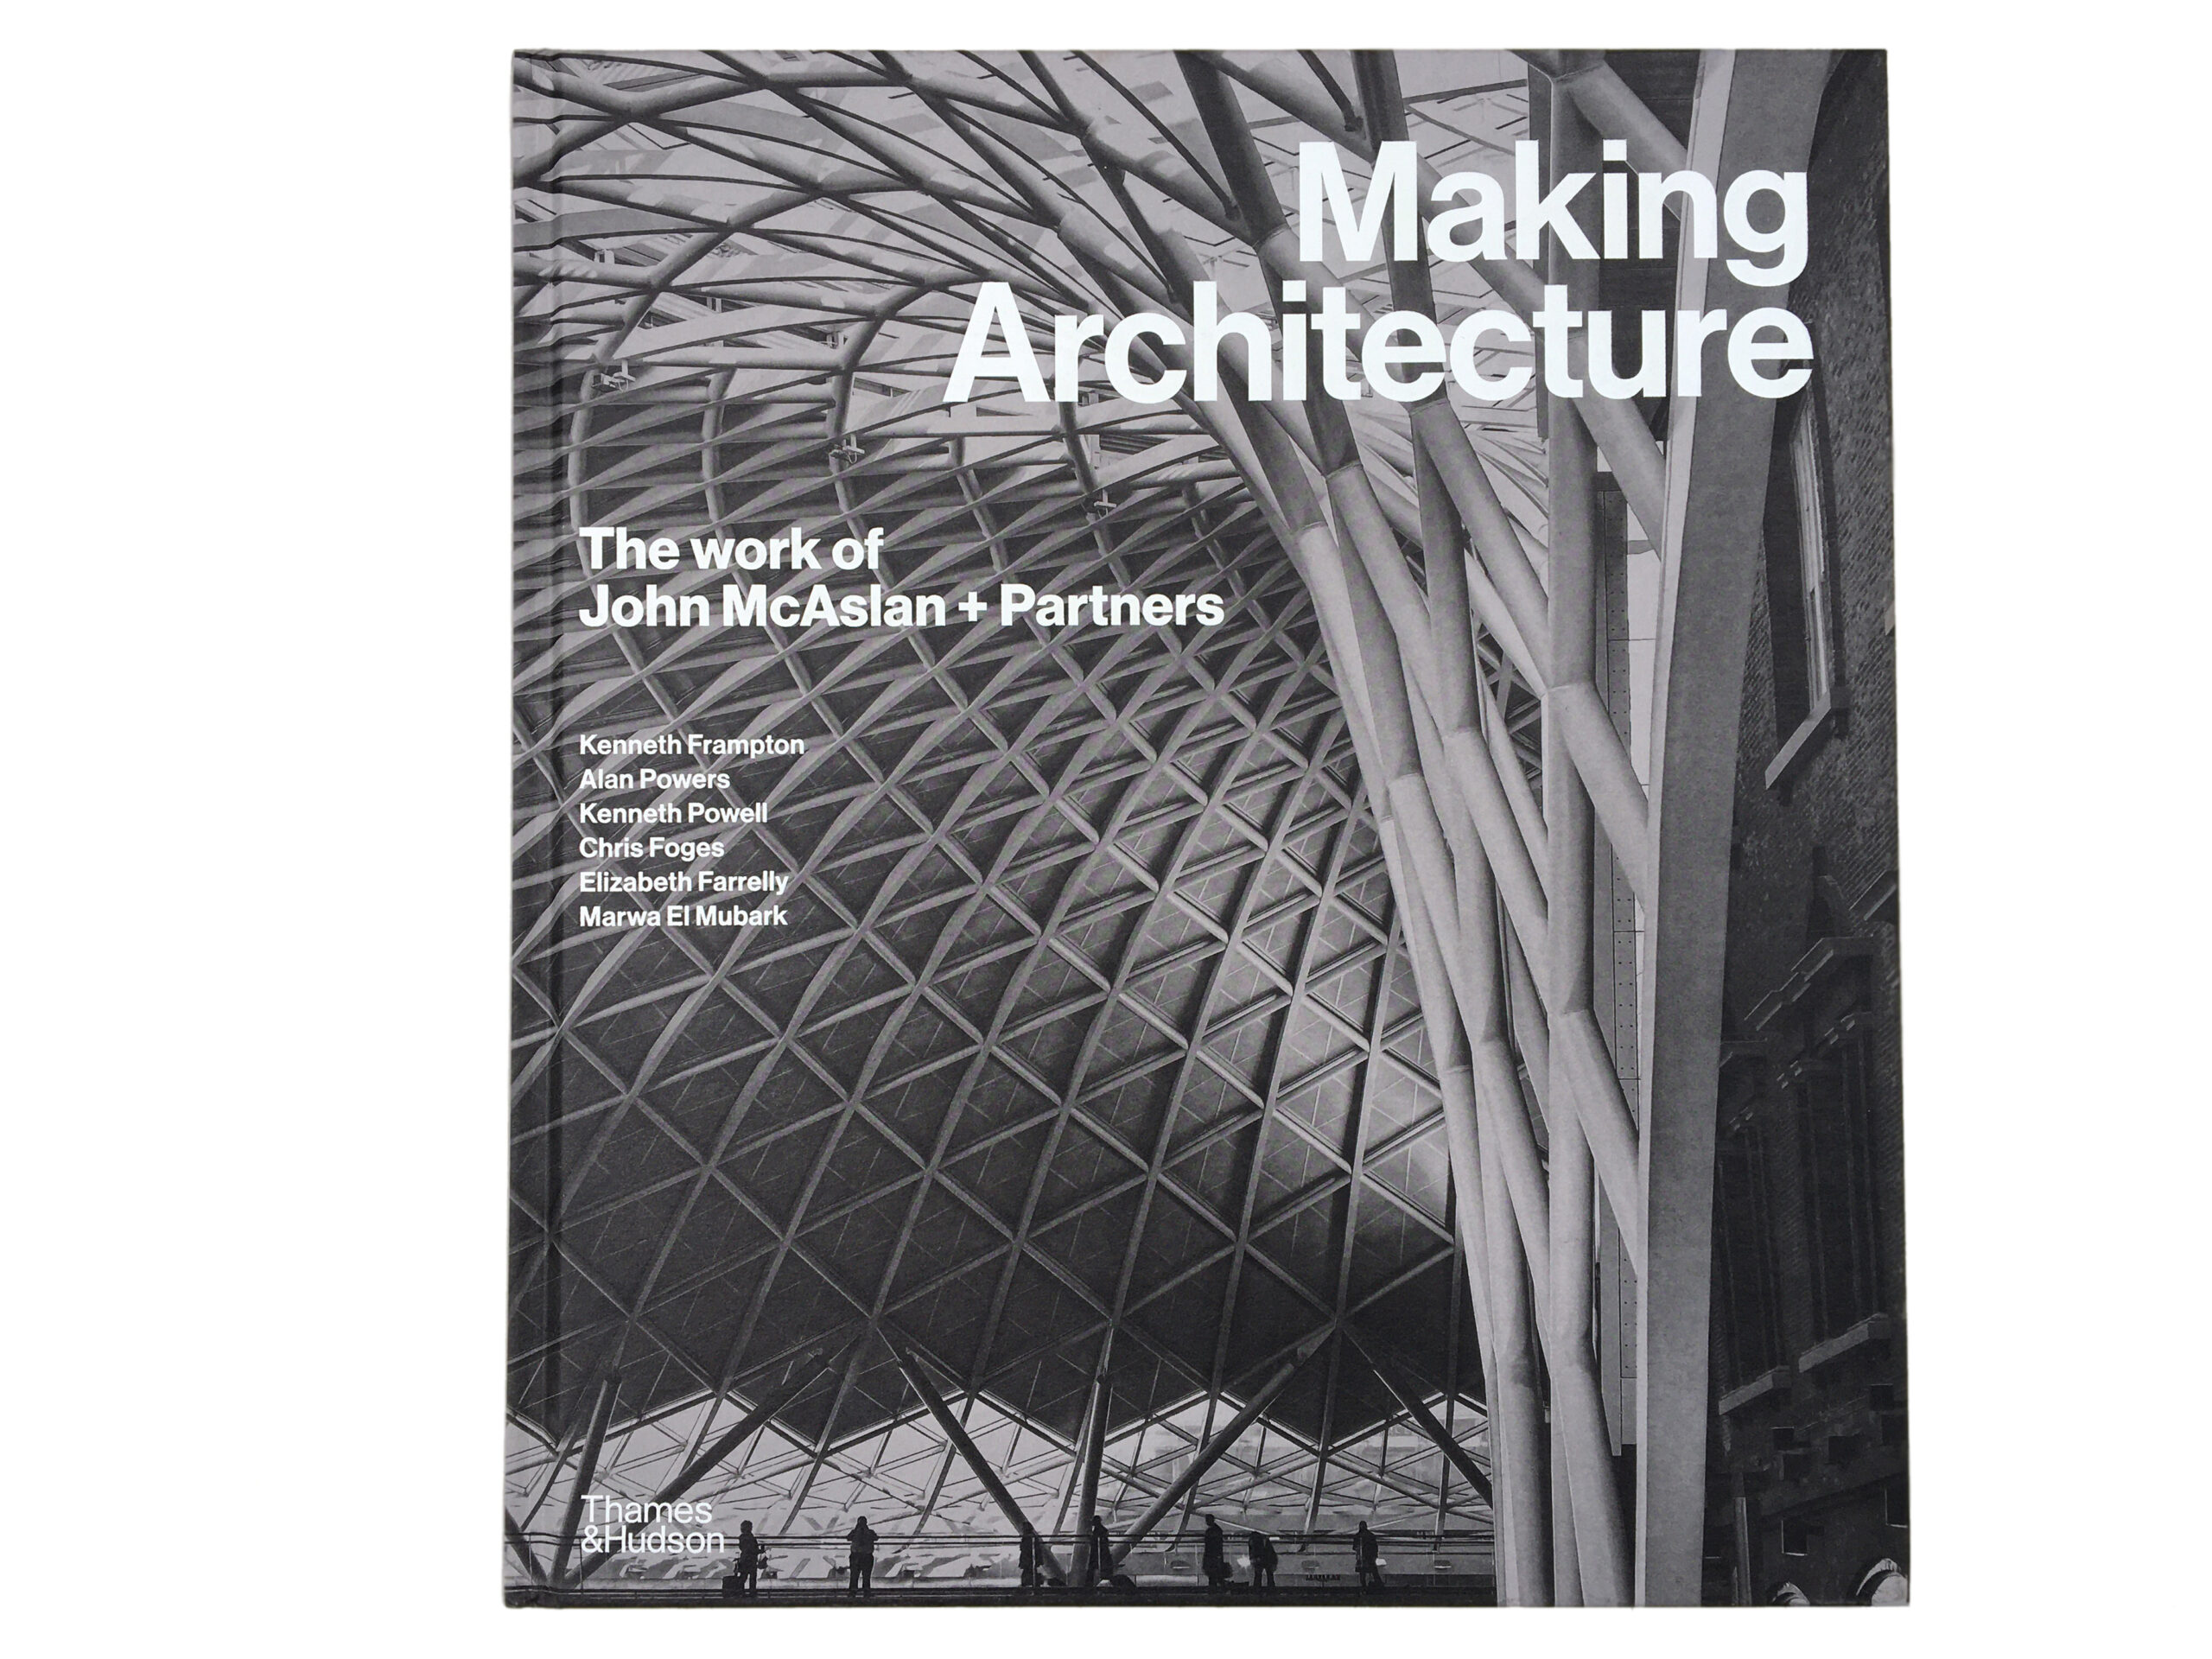 image of the event poster, with a black and white image of an architectural structure as the backdrop.